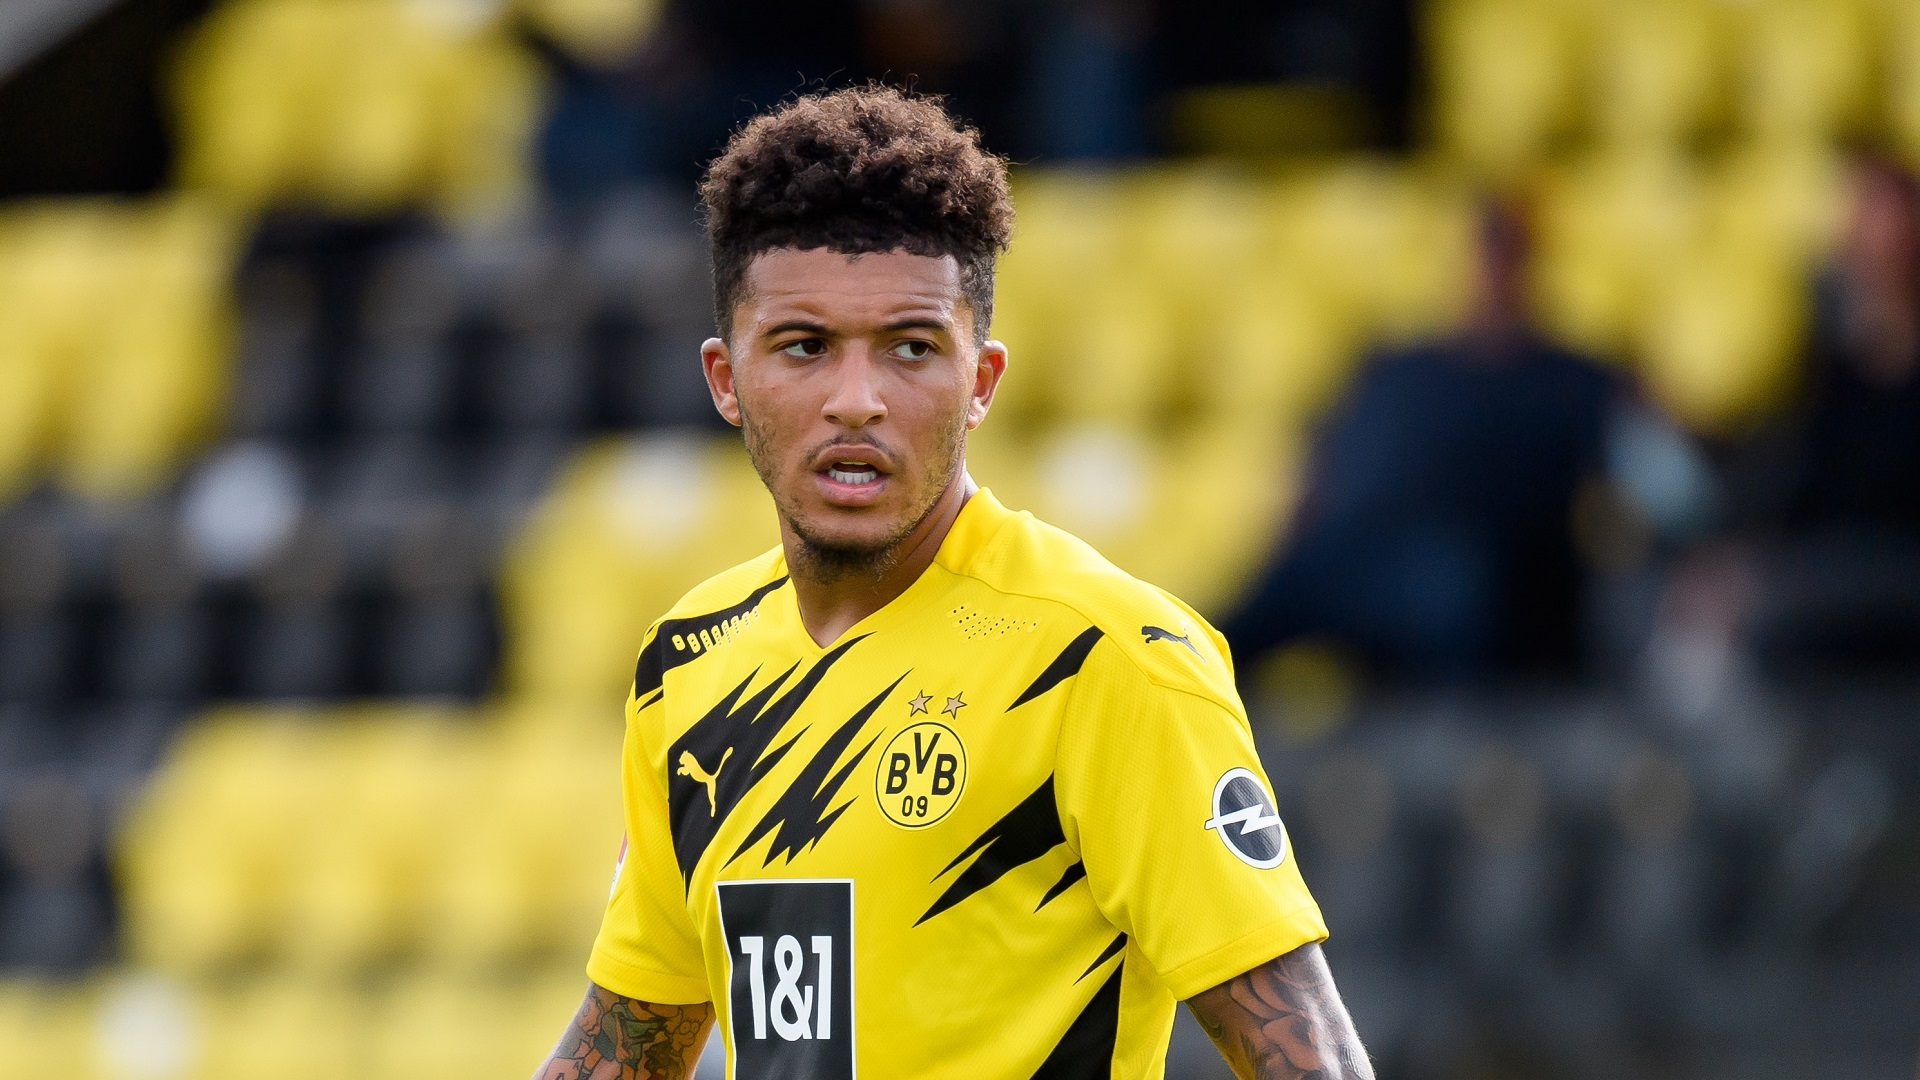 Who Is Jadon Sancho: Biography, Personal Life, Football Career and Net Worth